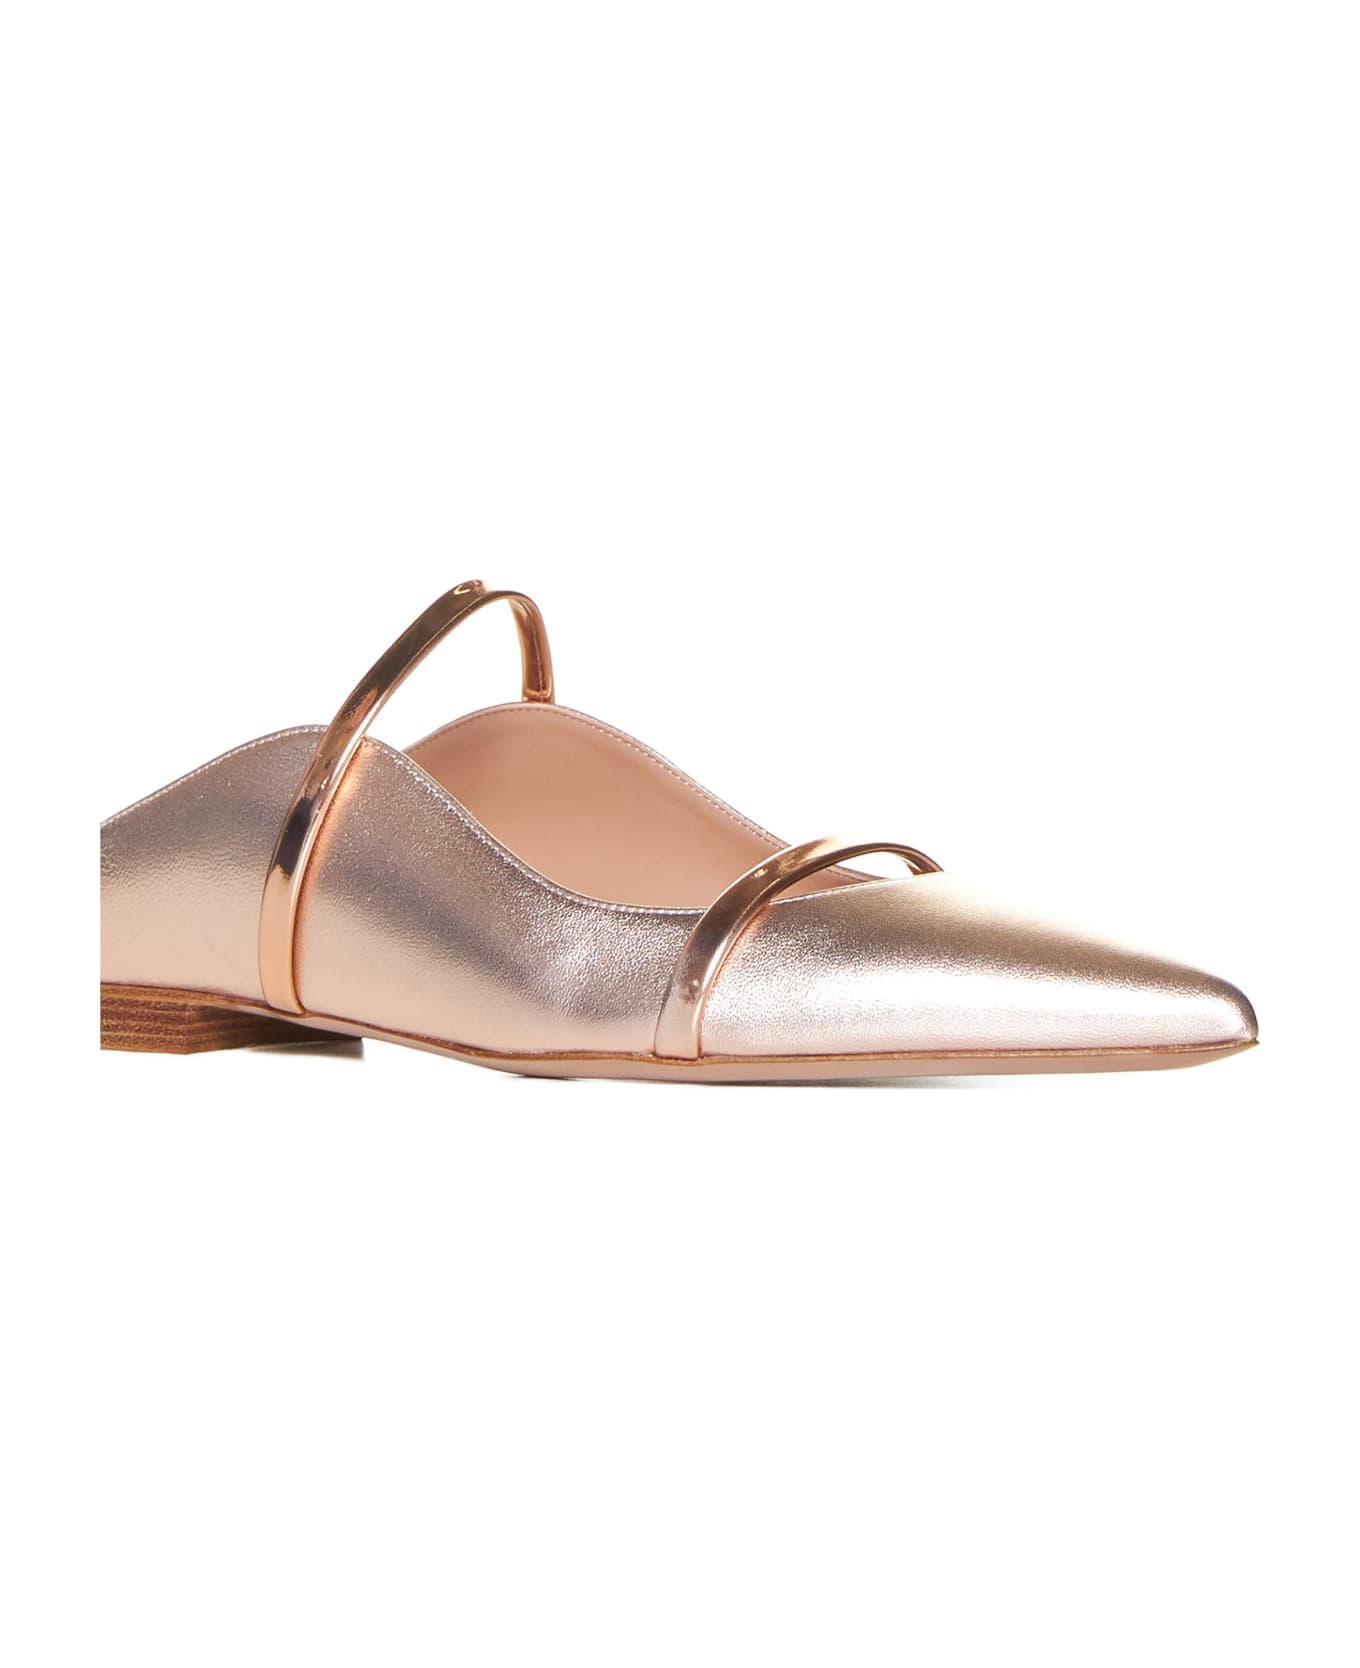 Malone Souliers Sandals - Rose gold